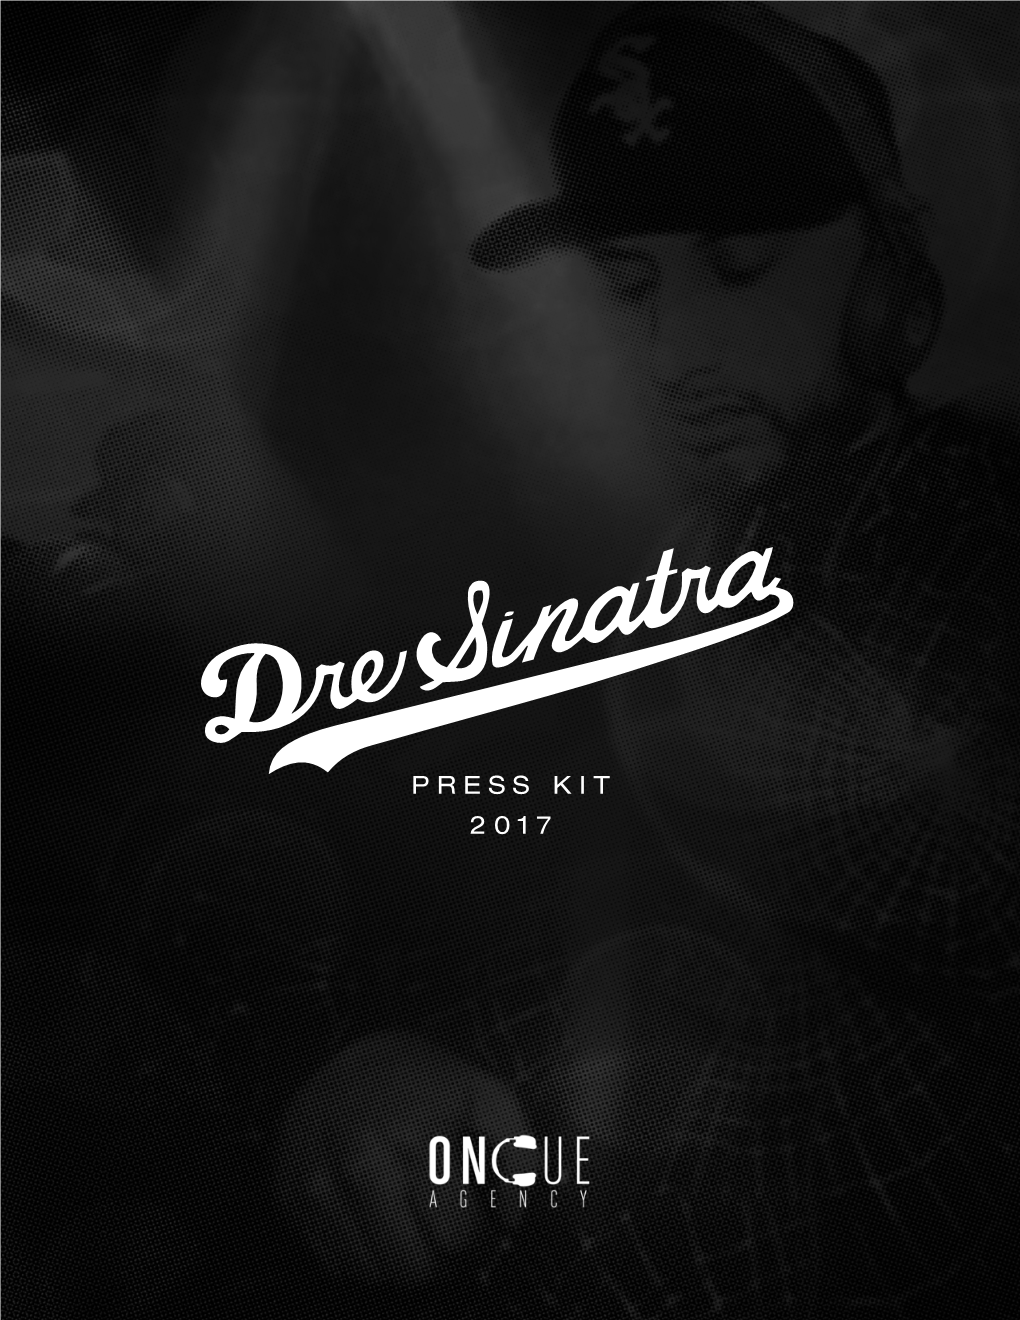 Press Kit 2017 Dre Sinatra Is One of the Most Influential Players in the La Music Scene As a Tastemaker Dj, Producer and Entertainment Entrepreneur